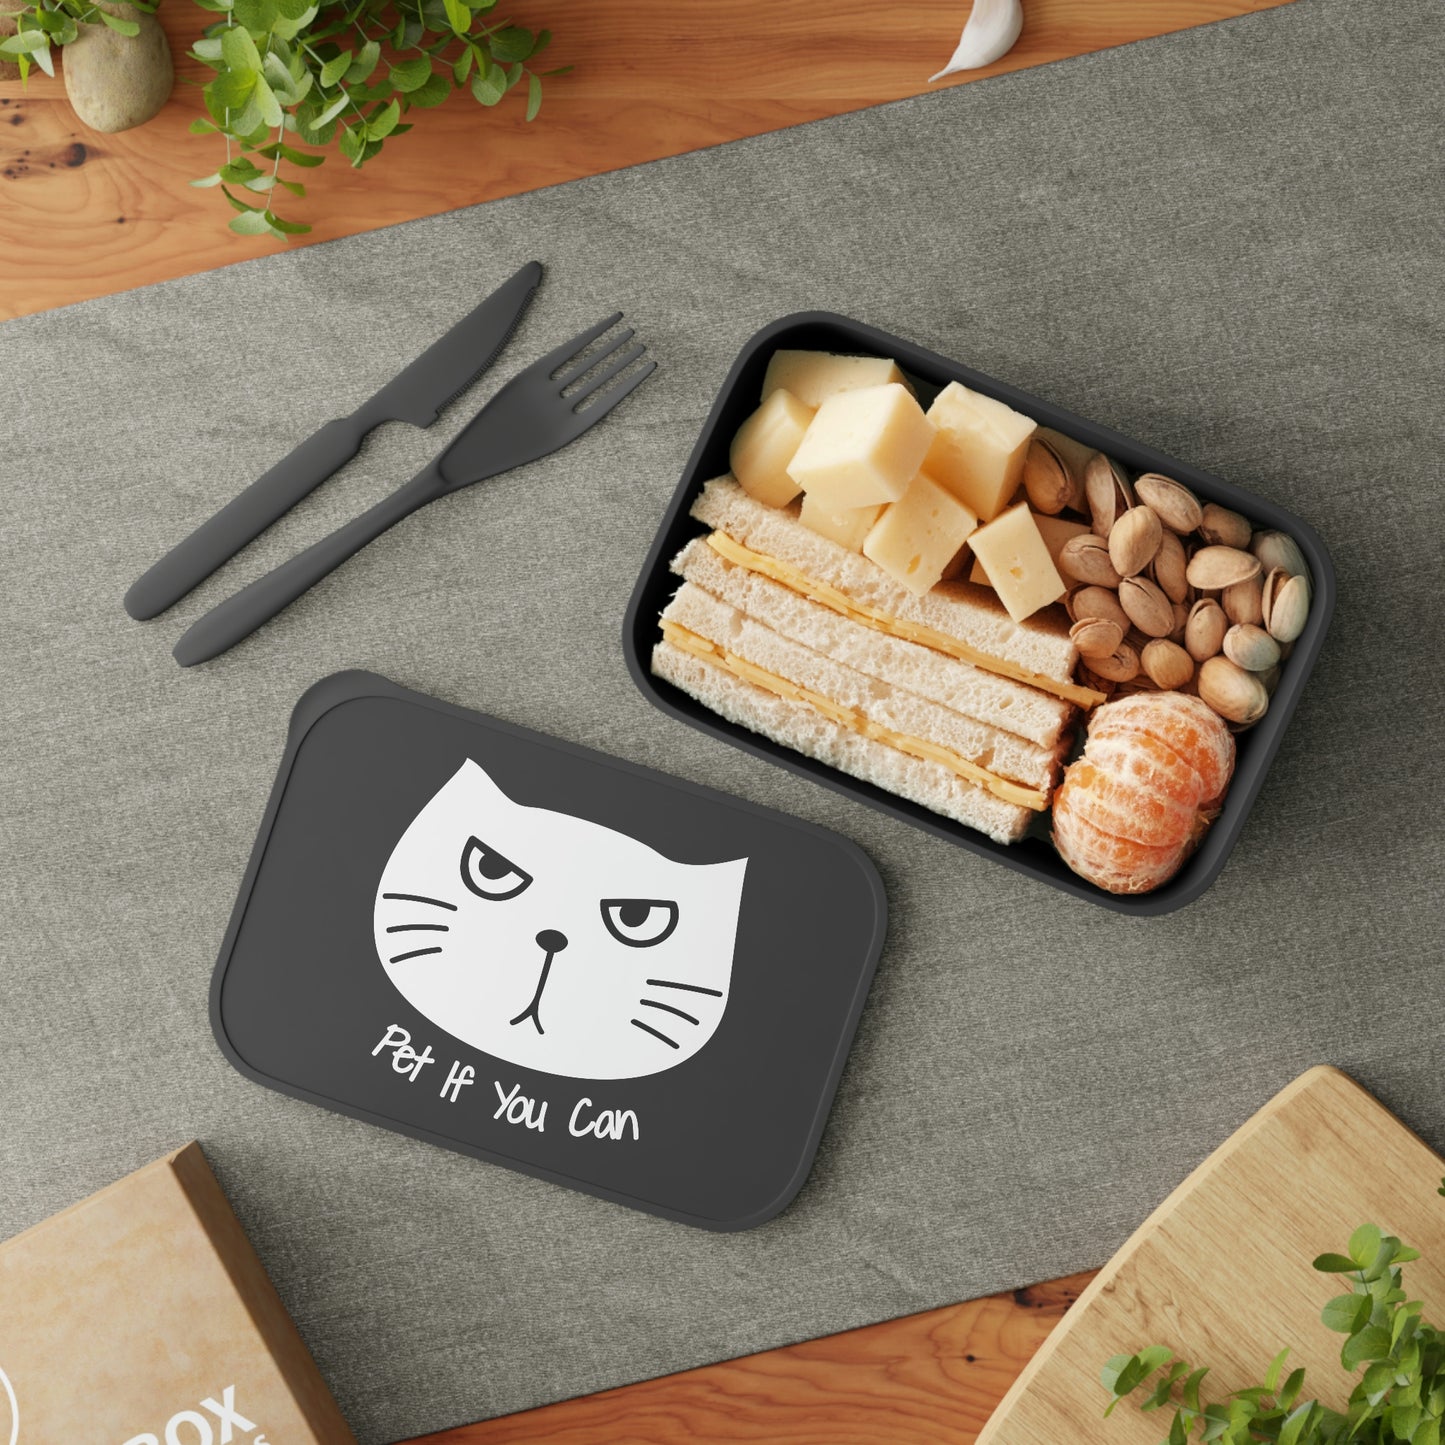 White cat "Pet If You Can" PLA Bento Box with Band and Utensils, kawaii bento box, back to school, cat cute lunch bag, gift for her